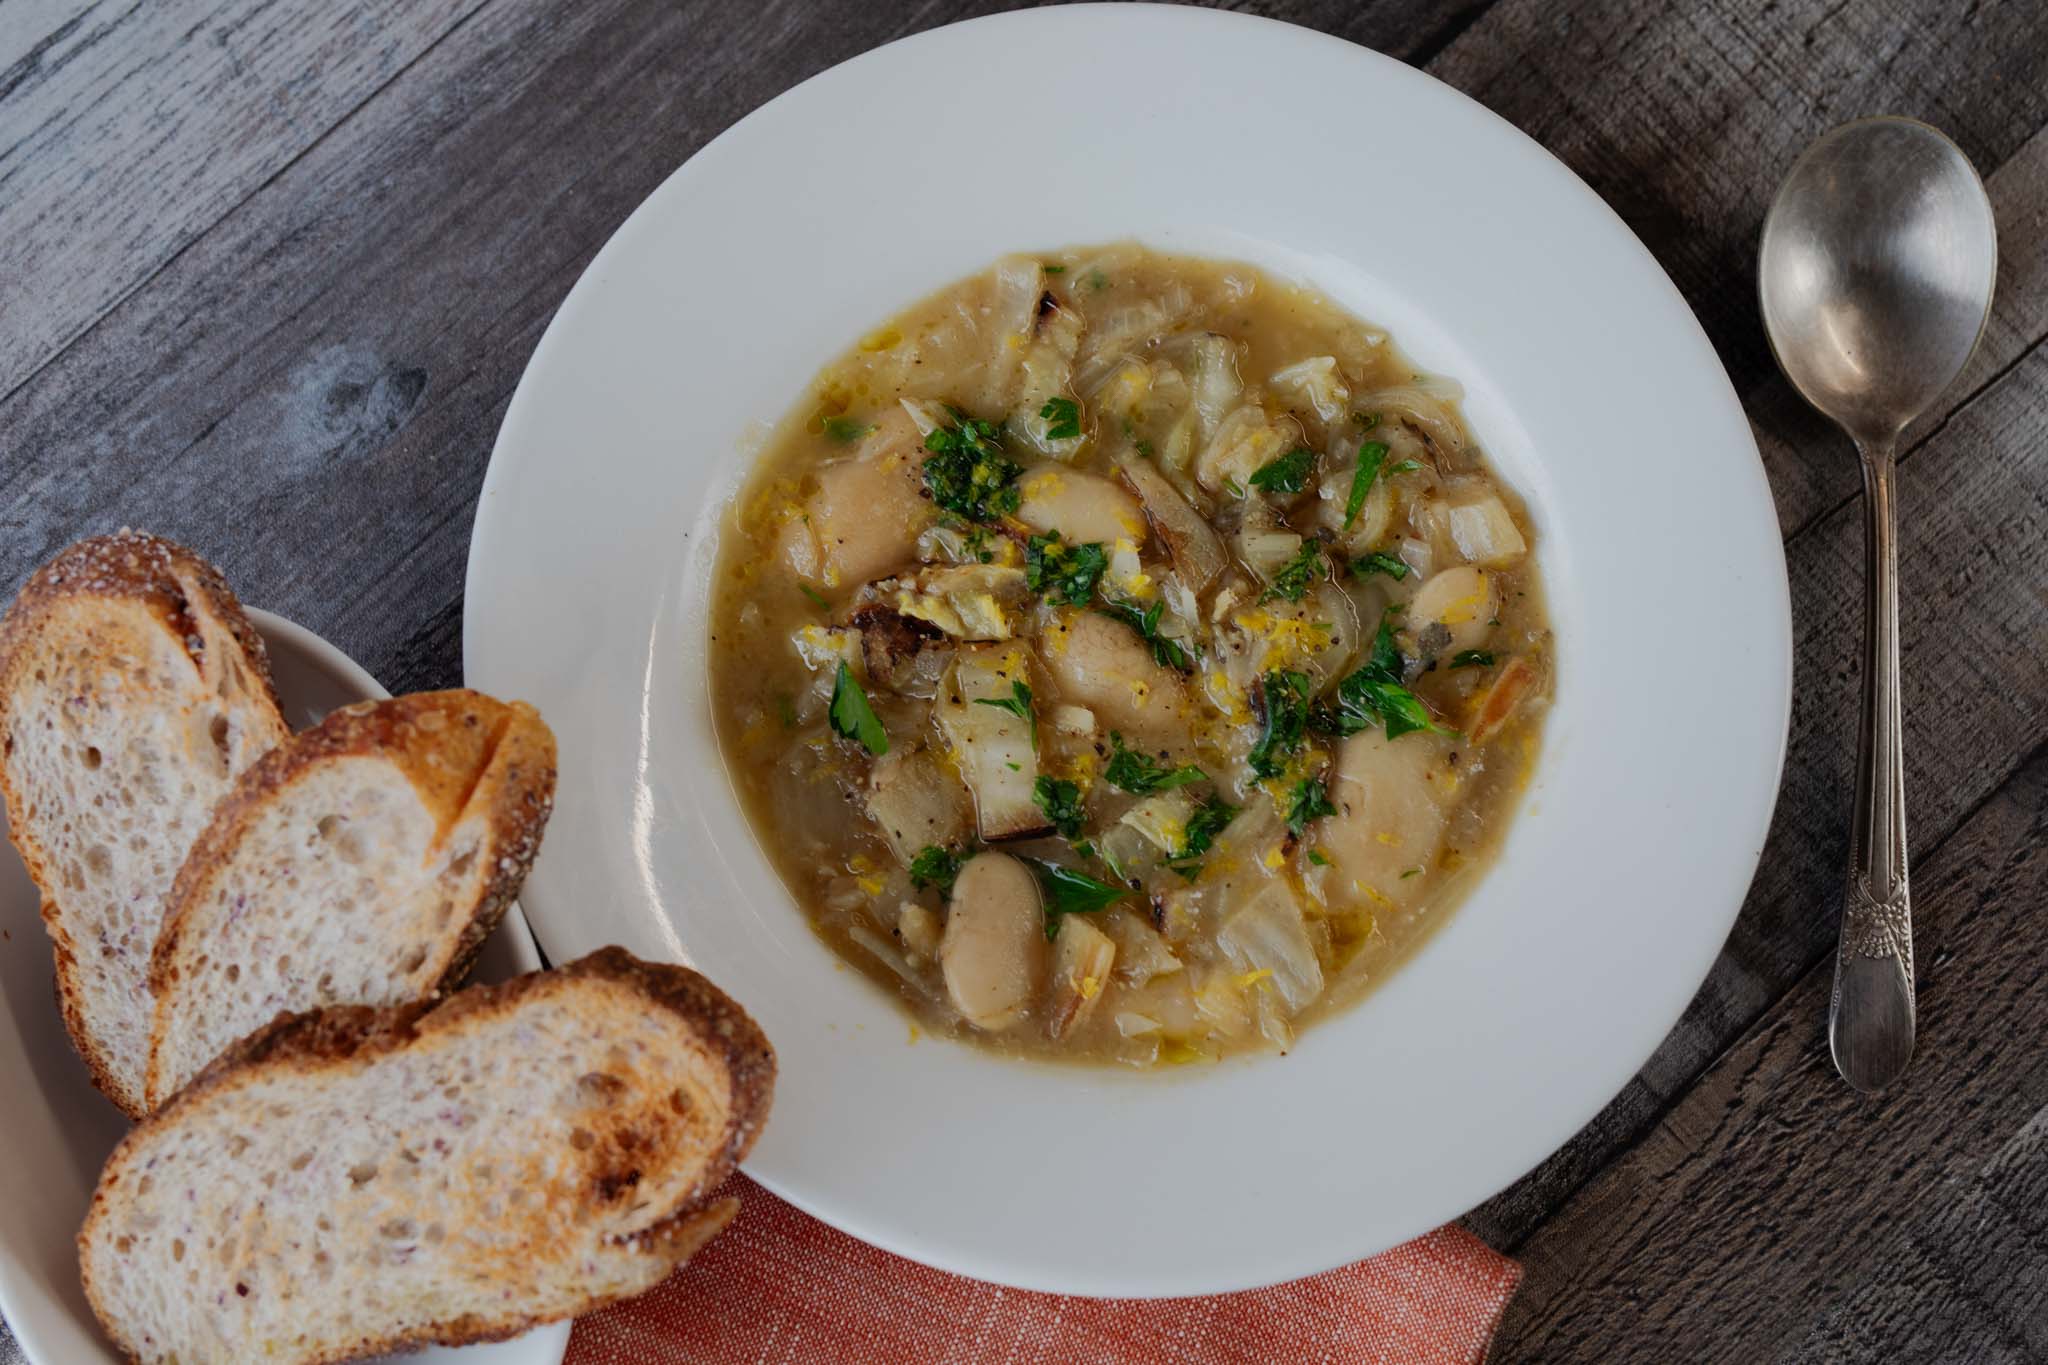 Charred Cabbage and Caramelized Shallot Soup with Royal Corona Beans and Bread